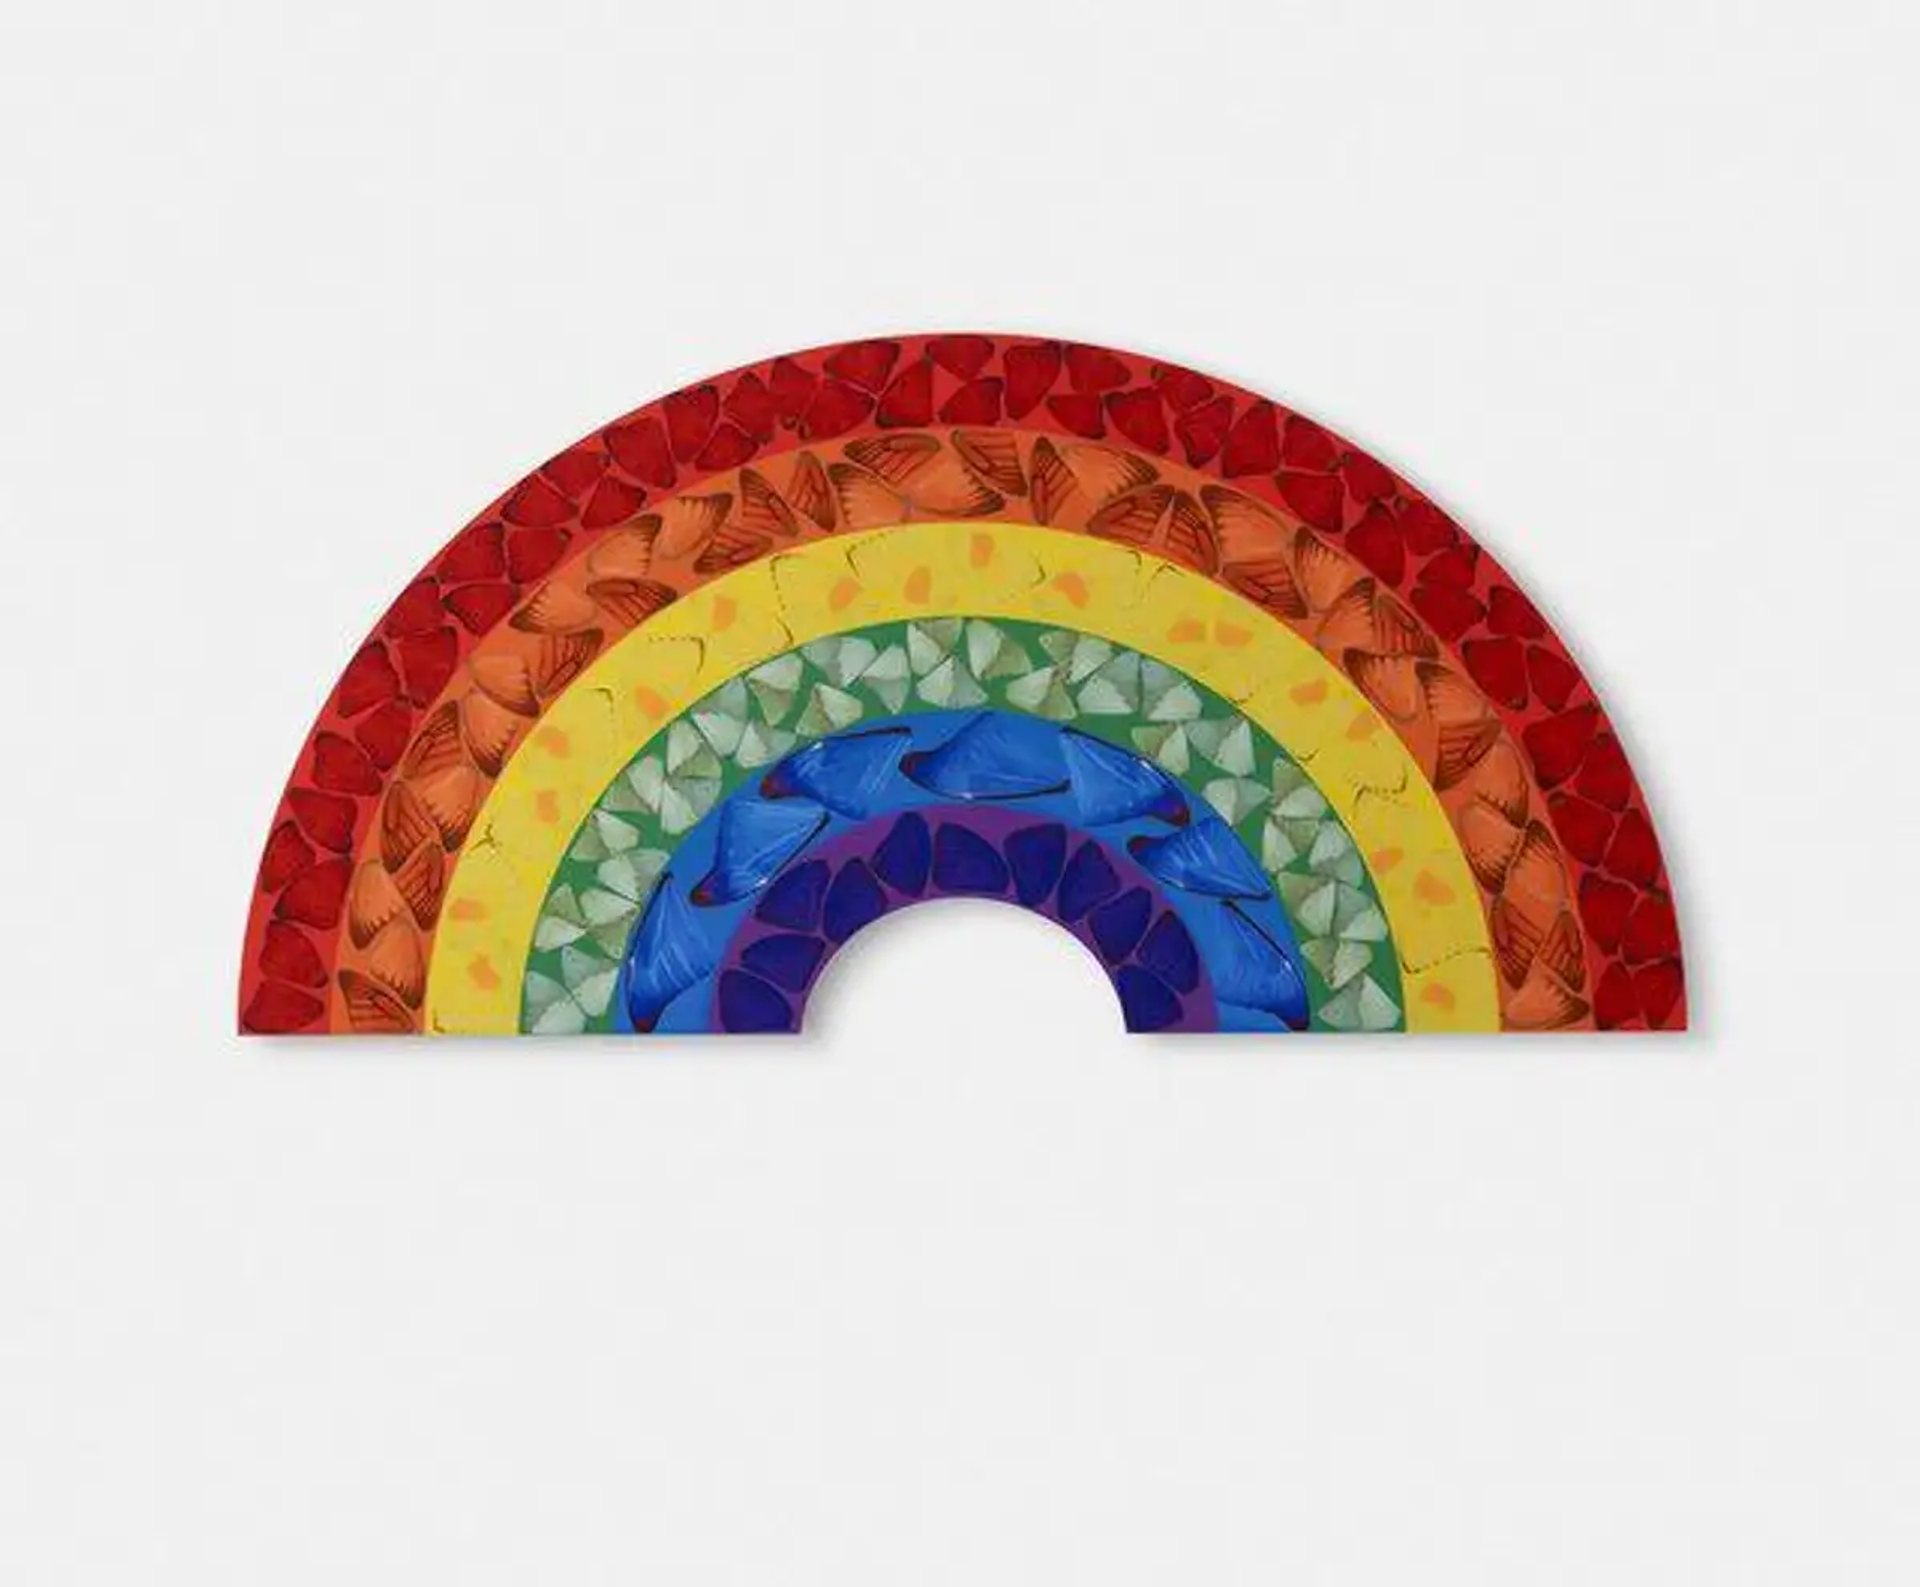 A rainbow against a white background, with colourful butterfly wings in each shade finishing the composition.